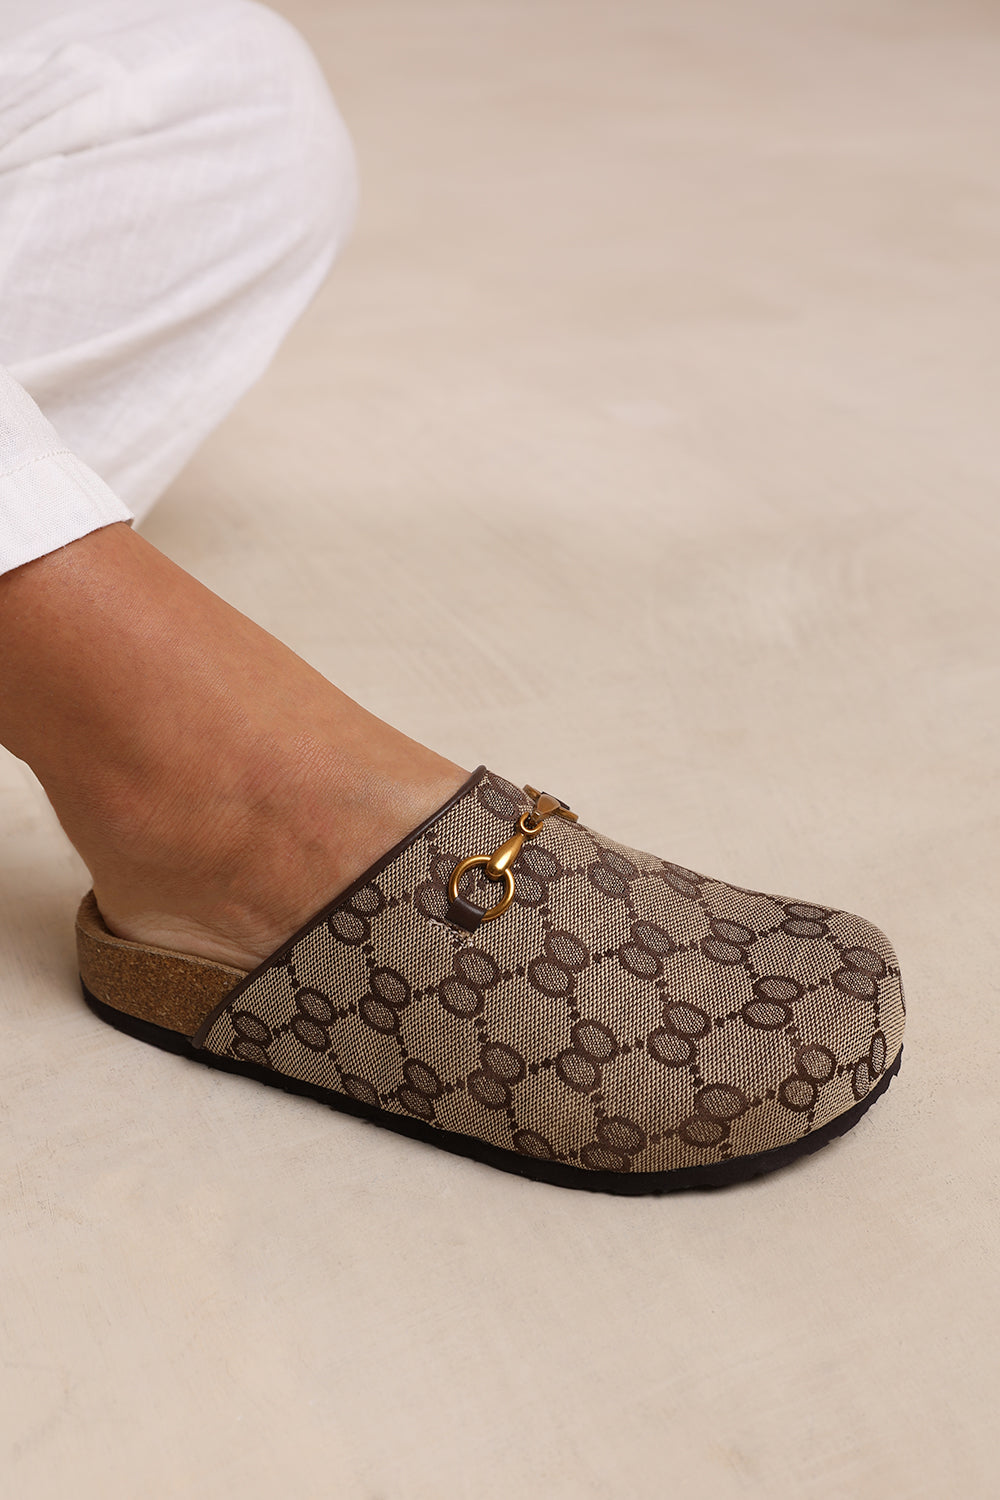 DUBLIN OPEN BACK SLIP ON LOAFER WITH GOLD DETAIL IN BROWN